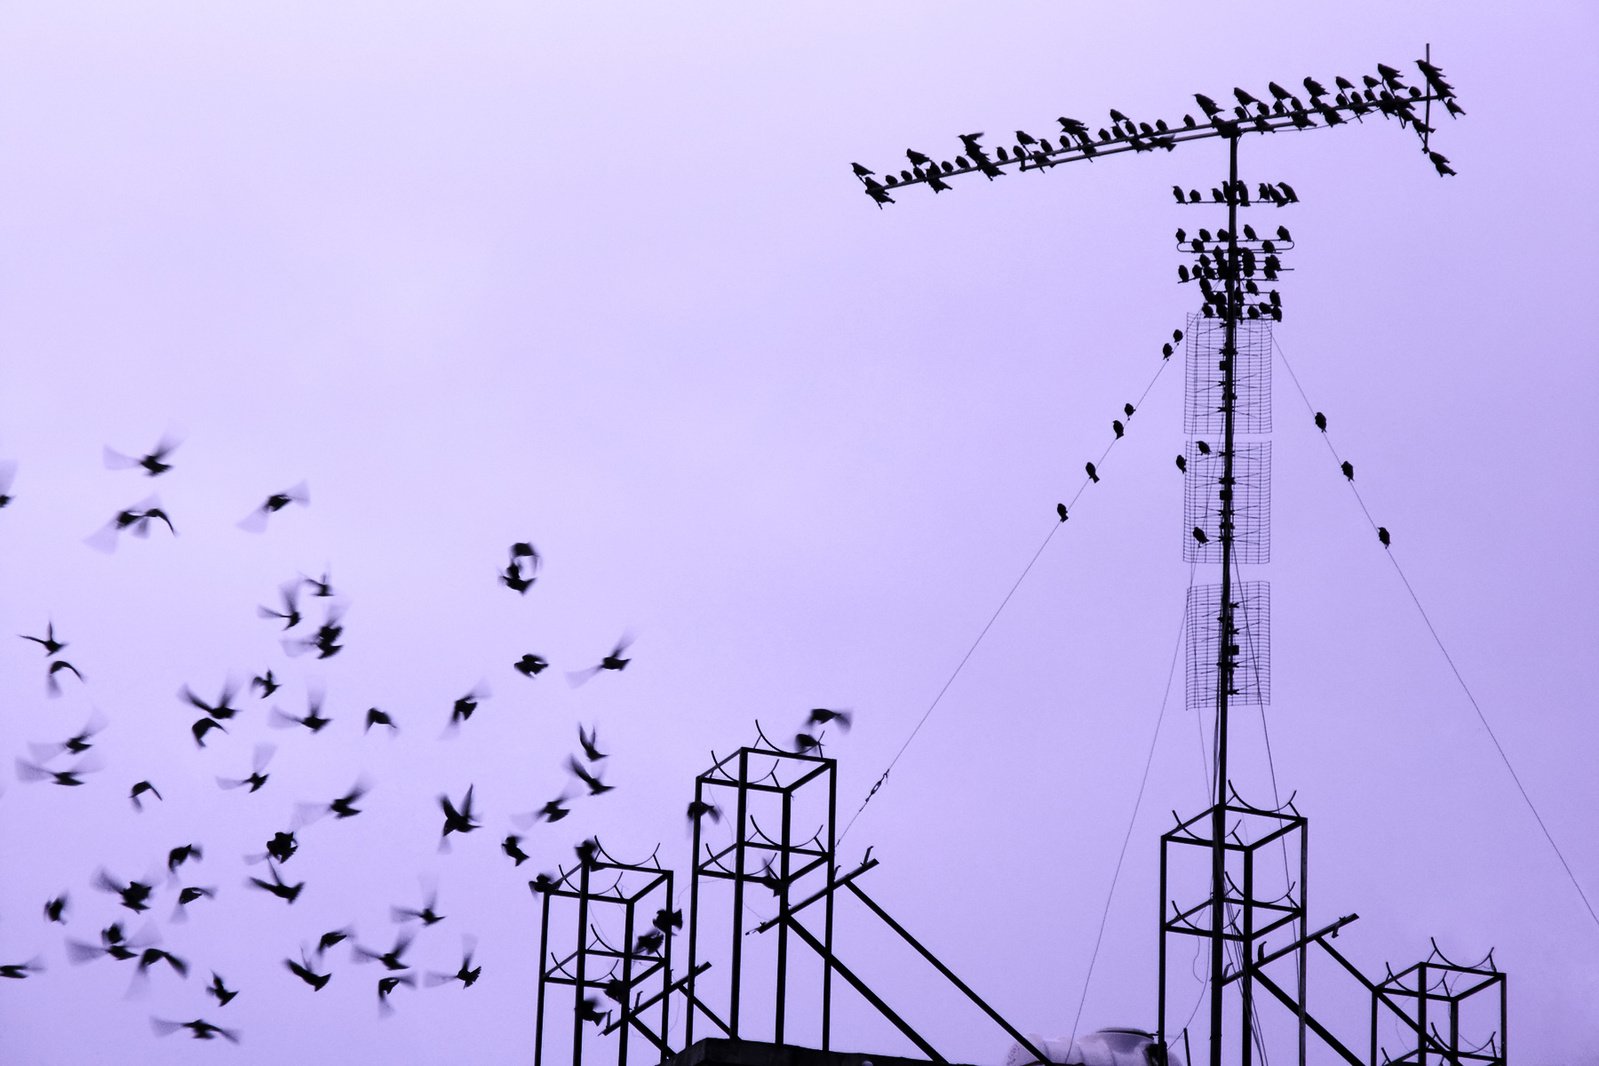 a flock of birds flying over a tower